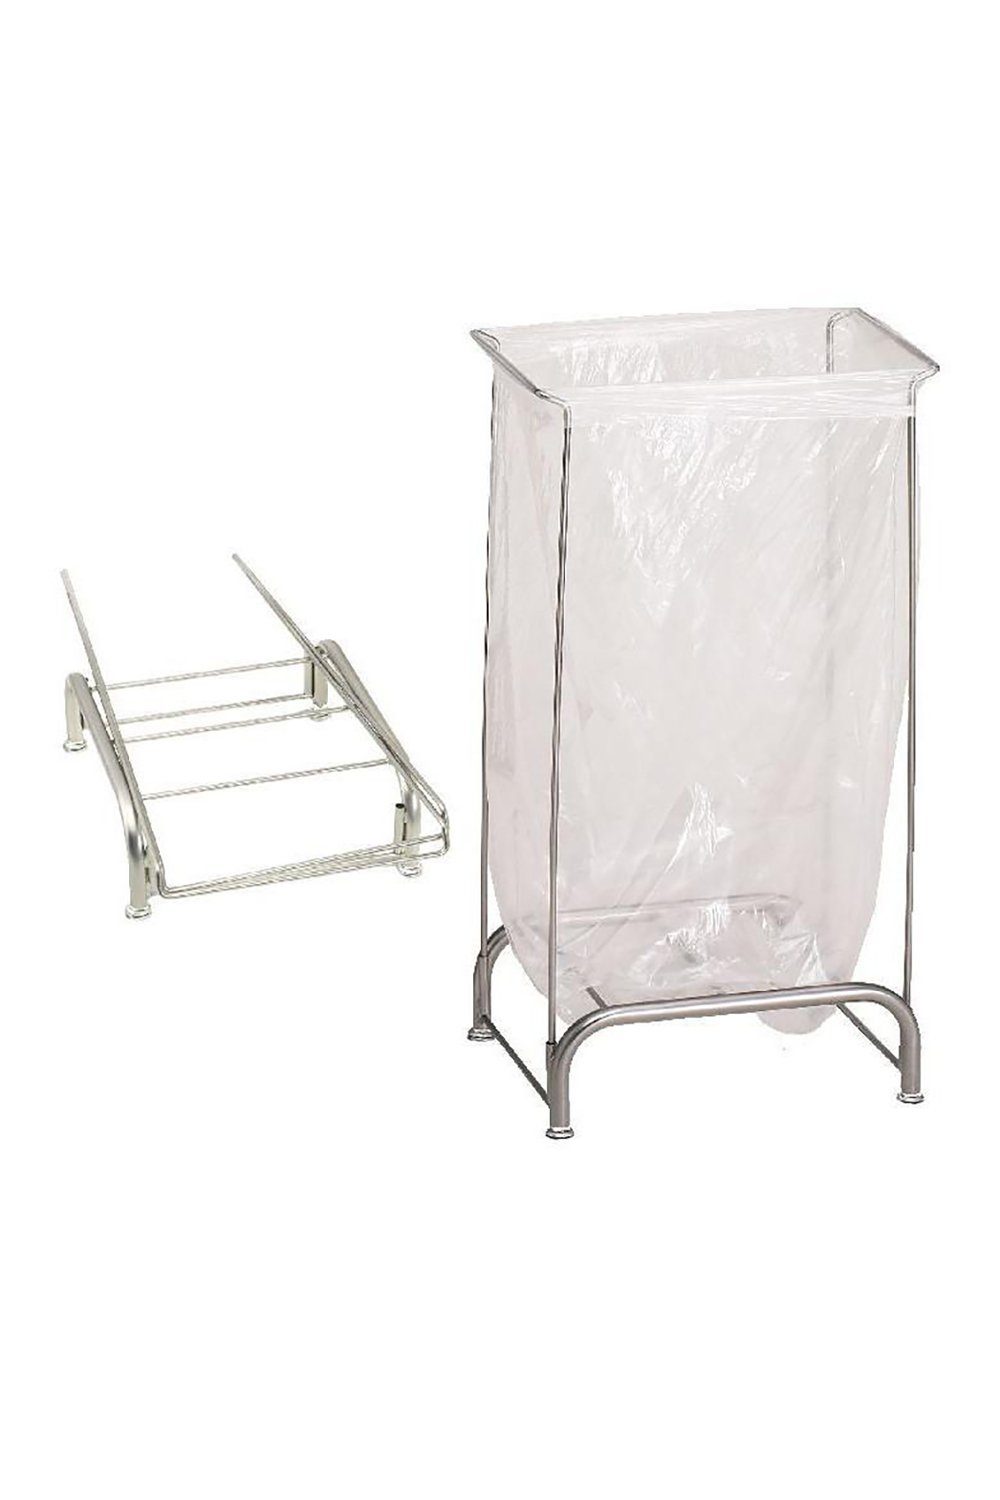 Tension Hamper Without Casters - Knocked-Down Infection Control & Housekeeping R&B 